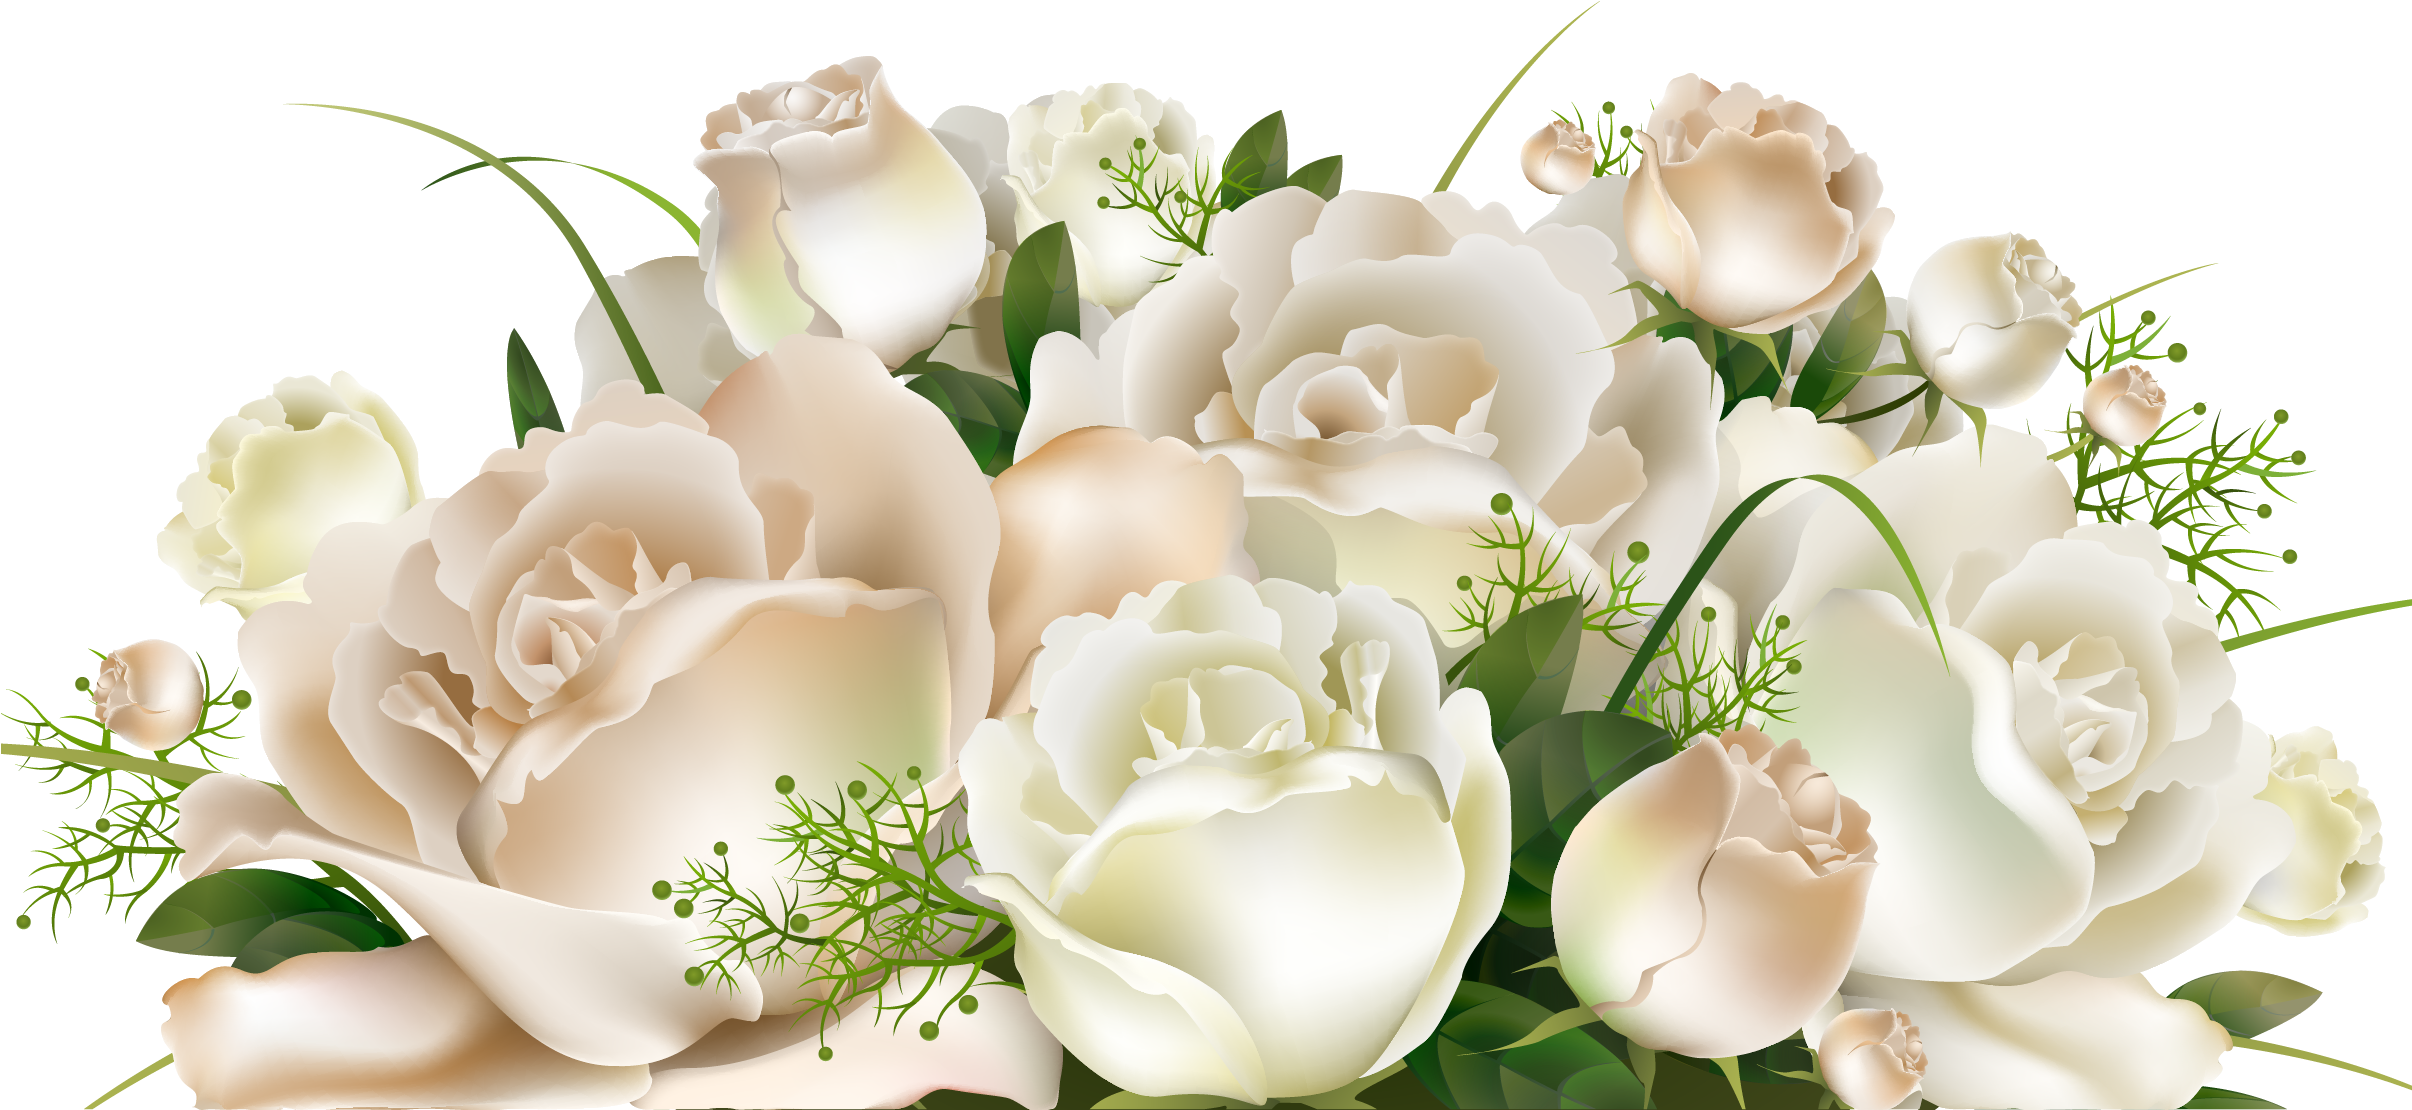 White Rose Bunch - Transparent Background White Roses Png (1200x746), Png Download